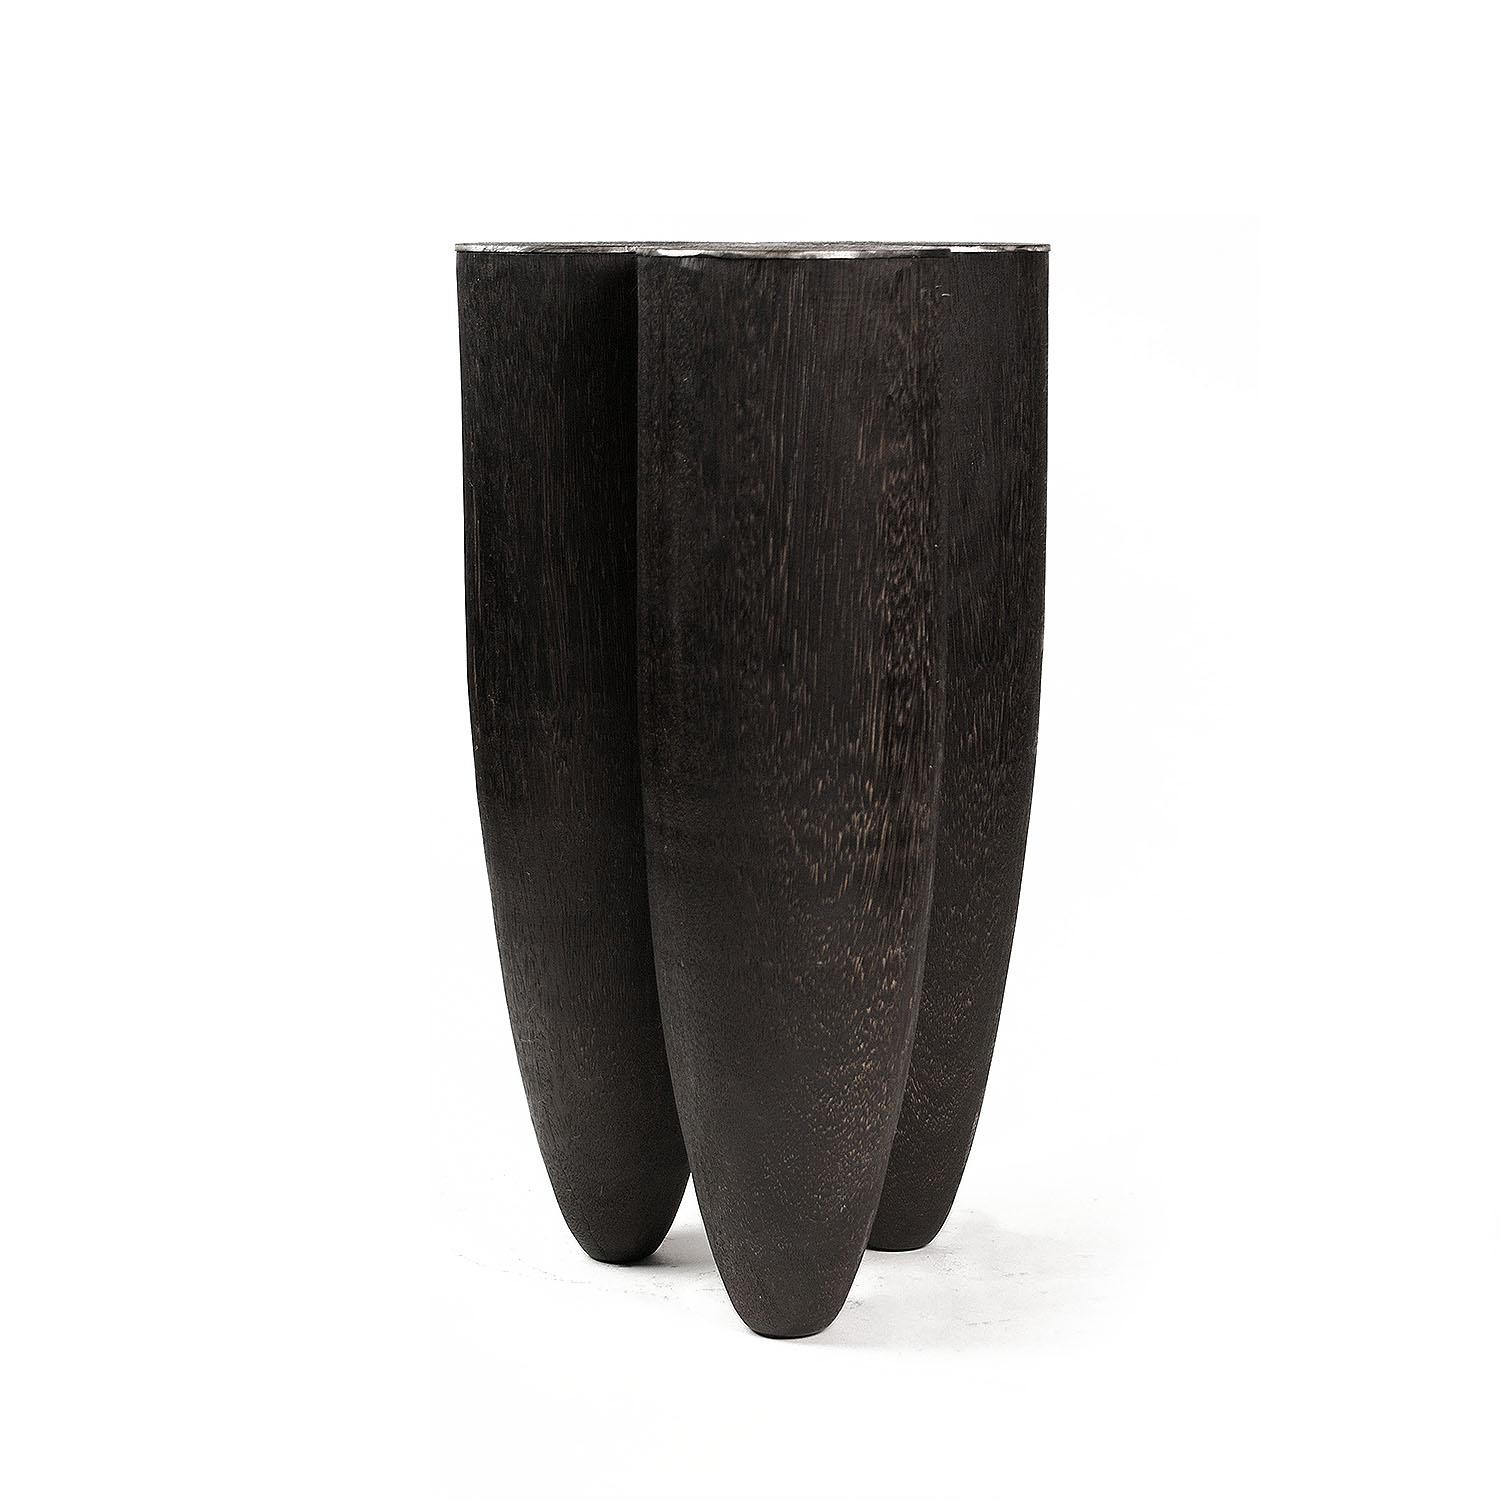 Contemporary black stool in iroko wood, Senufo by Arno Declercq

Material: Iroko wood and burned steel
Dimensions: Dimensions: 50 cm H x 30 cm W

Made by hand, in Belgium.

Arno Declercq
Belgian designer and art dealer who makes bespoke